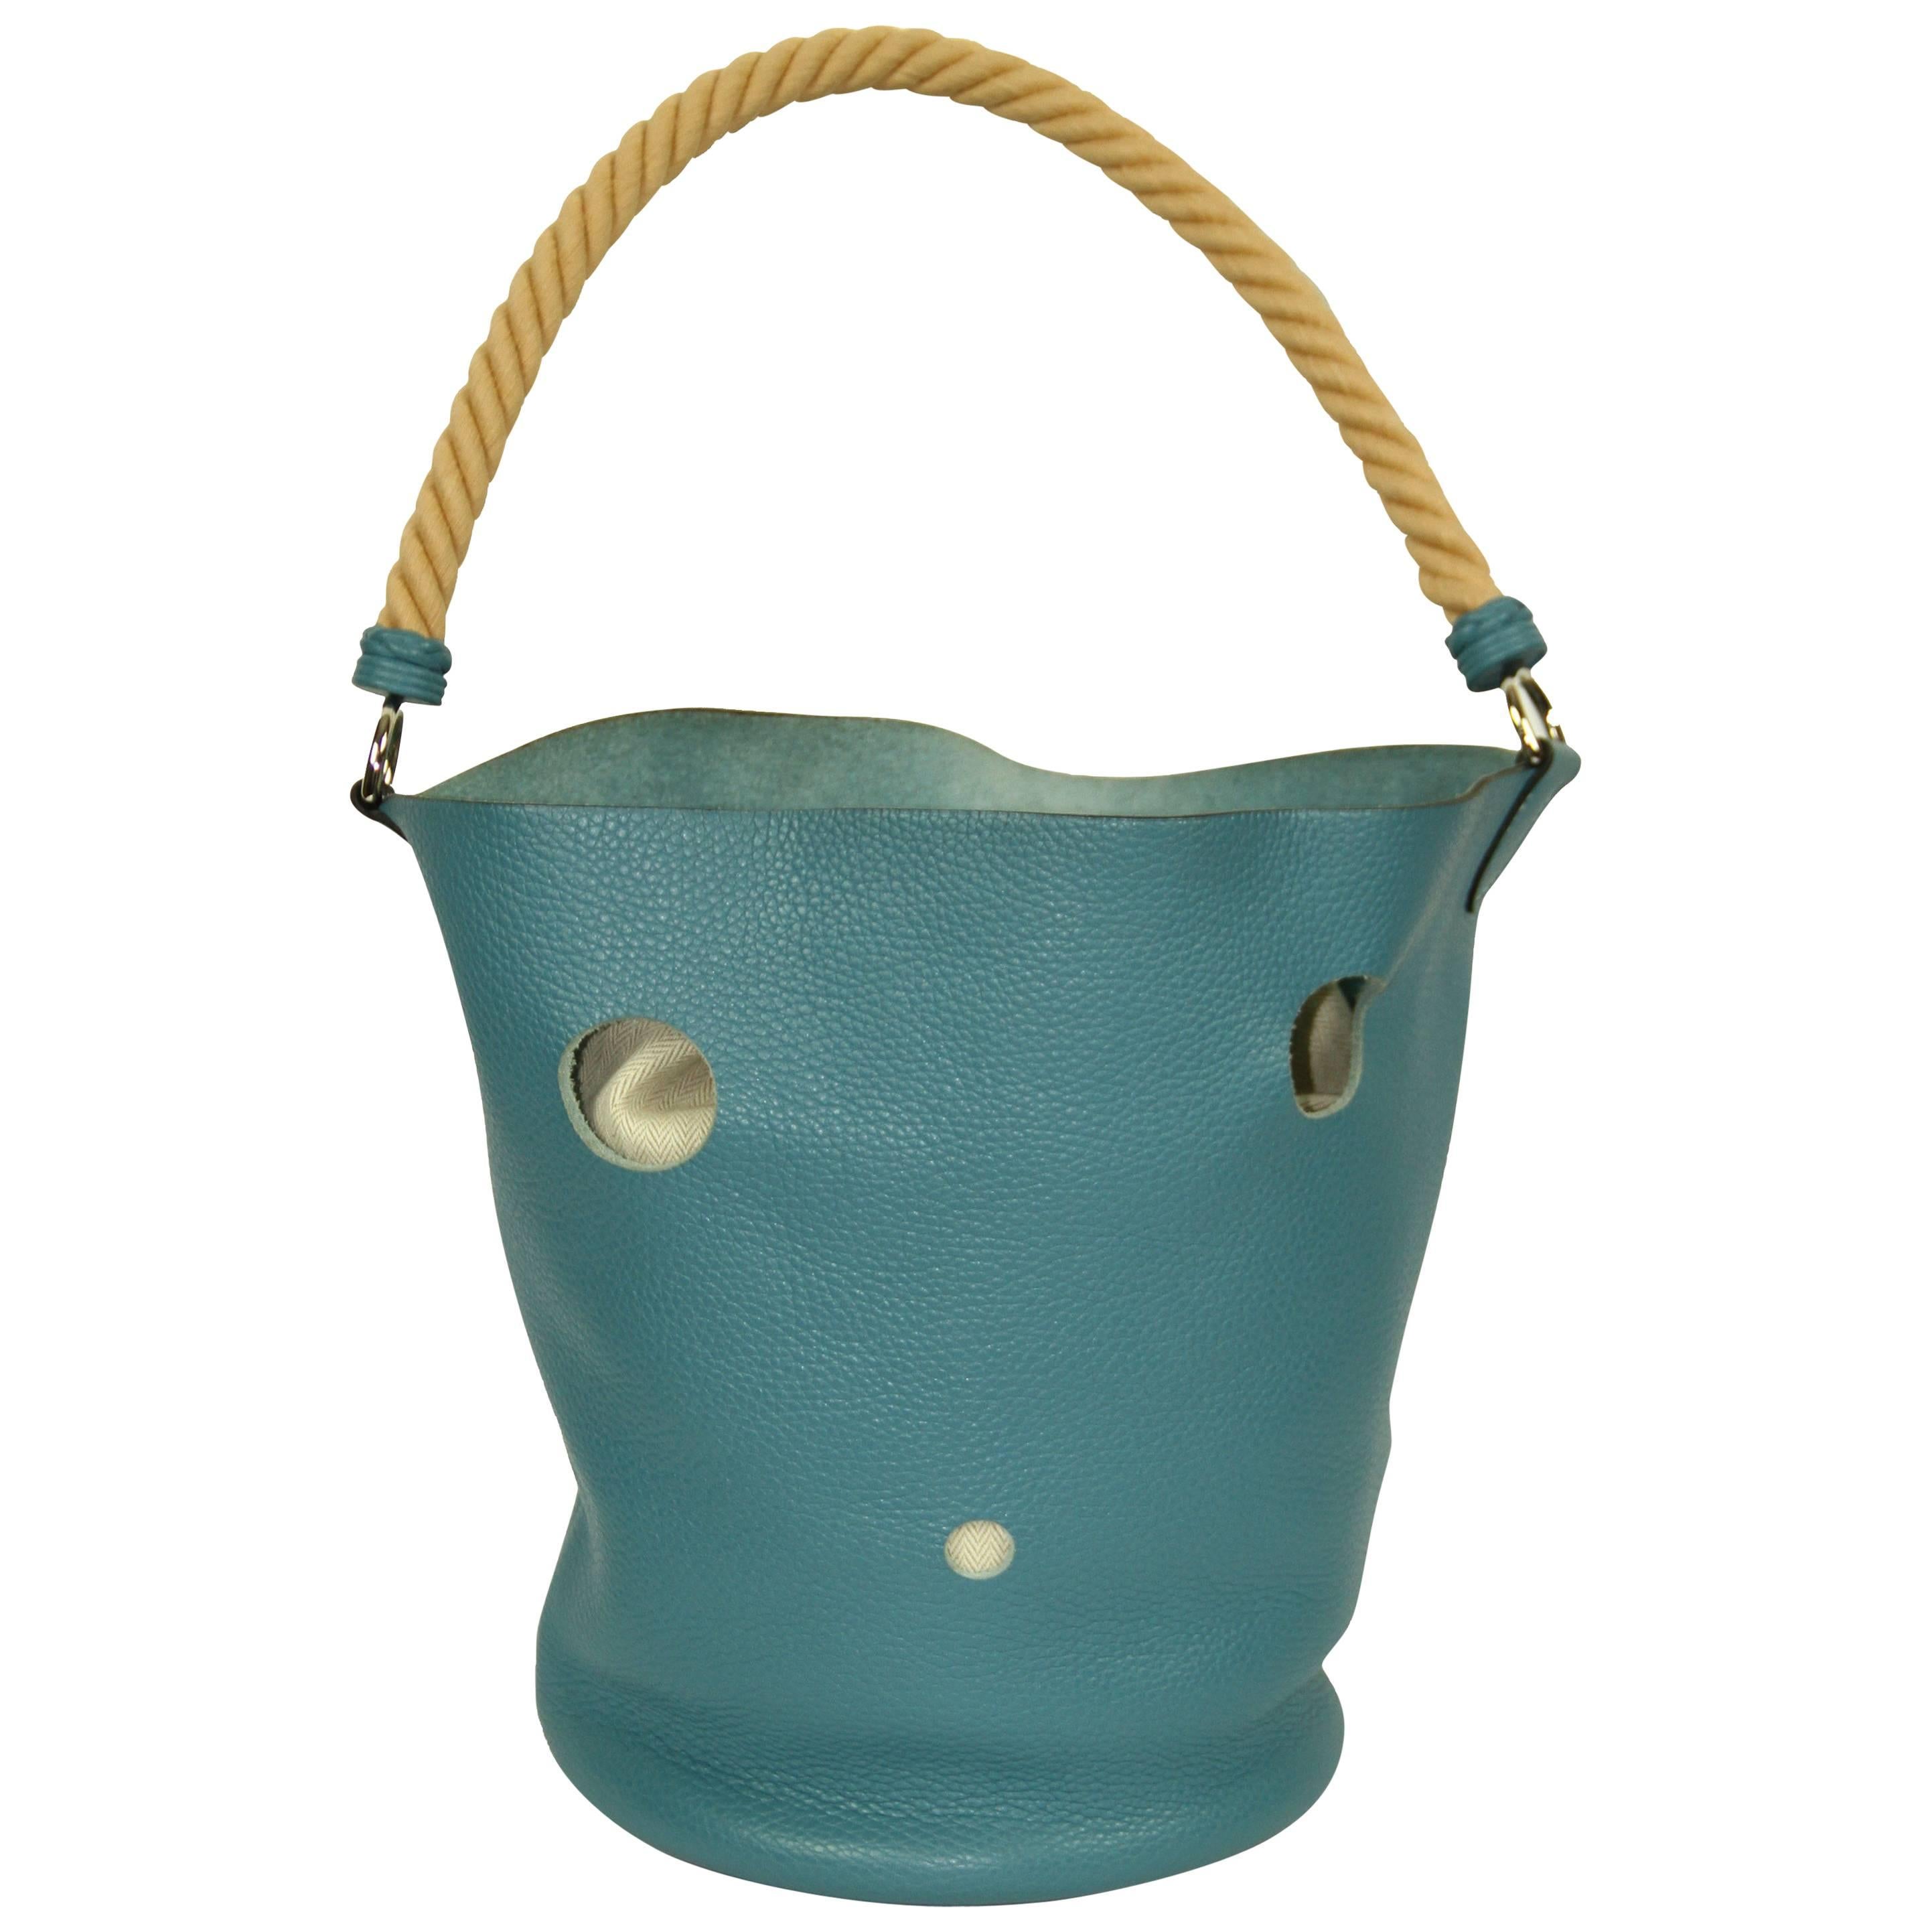 HERMES "Mangeoire" Collection Blue Taurillon Leather Bucket Bag  